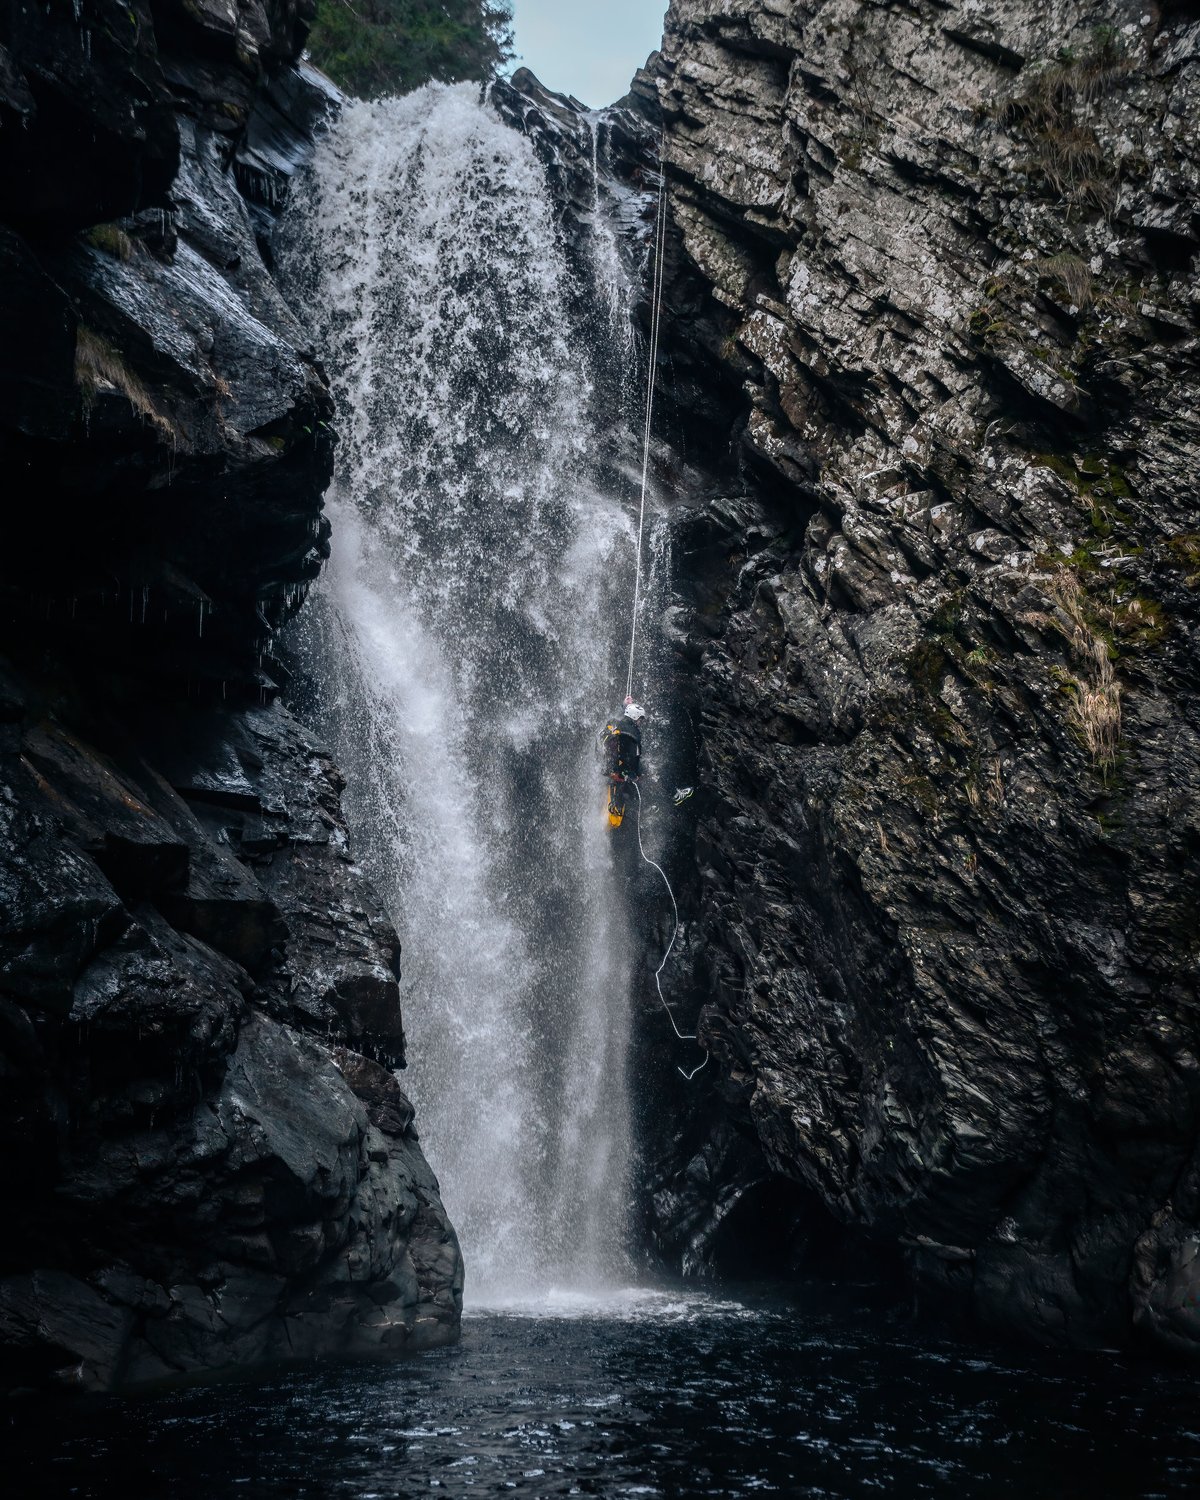 Experience the thrill of canyoning in Scotland's stunning natural landscapes with our small-group tours. Led by experienced guides, you'll explore waterfalls, gorges, and rapids in a safe and fun environment.